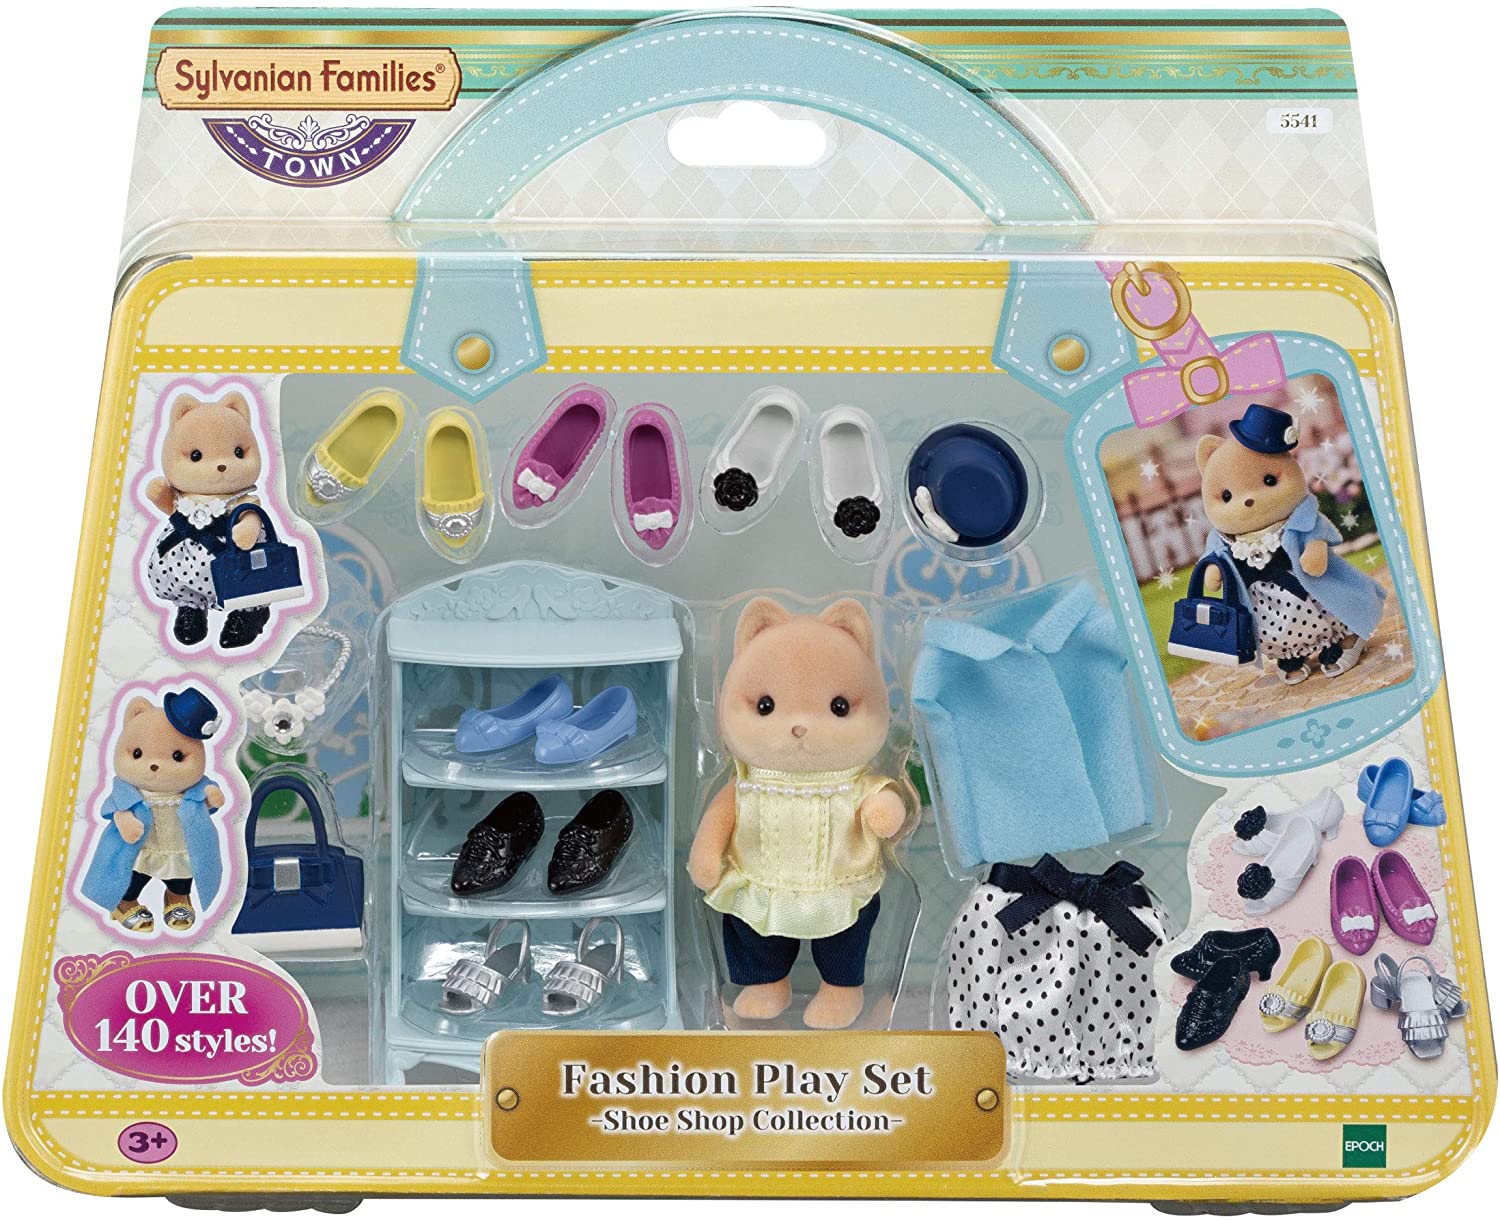 Shop, and toy Surprise New Cat Midnight Sylvanian Critters Shoe Panda family, 2021: more! sets House, Families Spooky family Calico